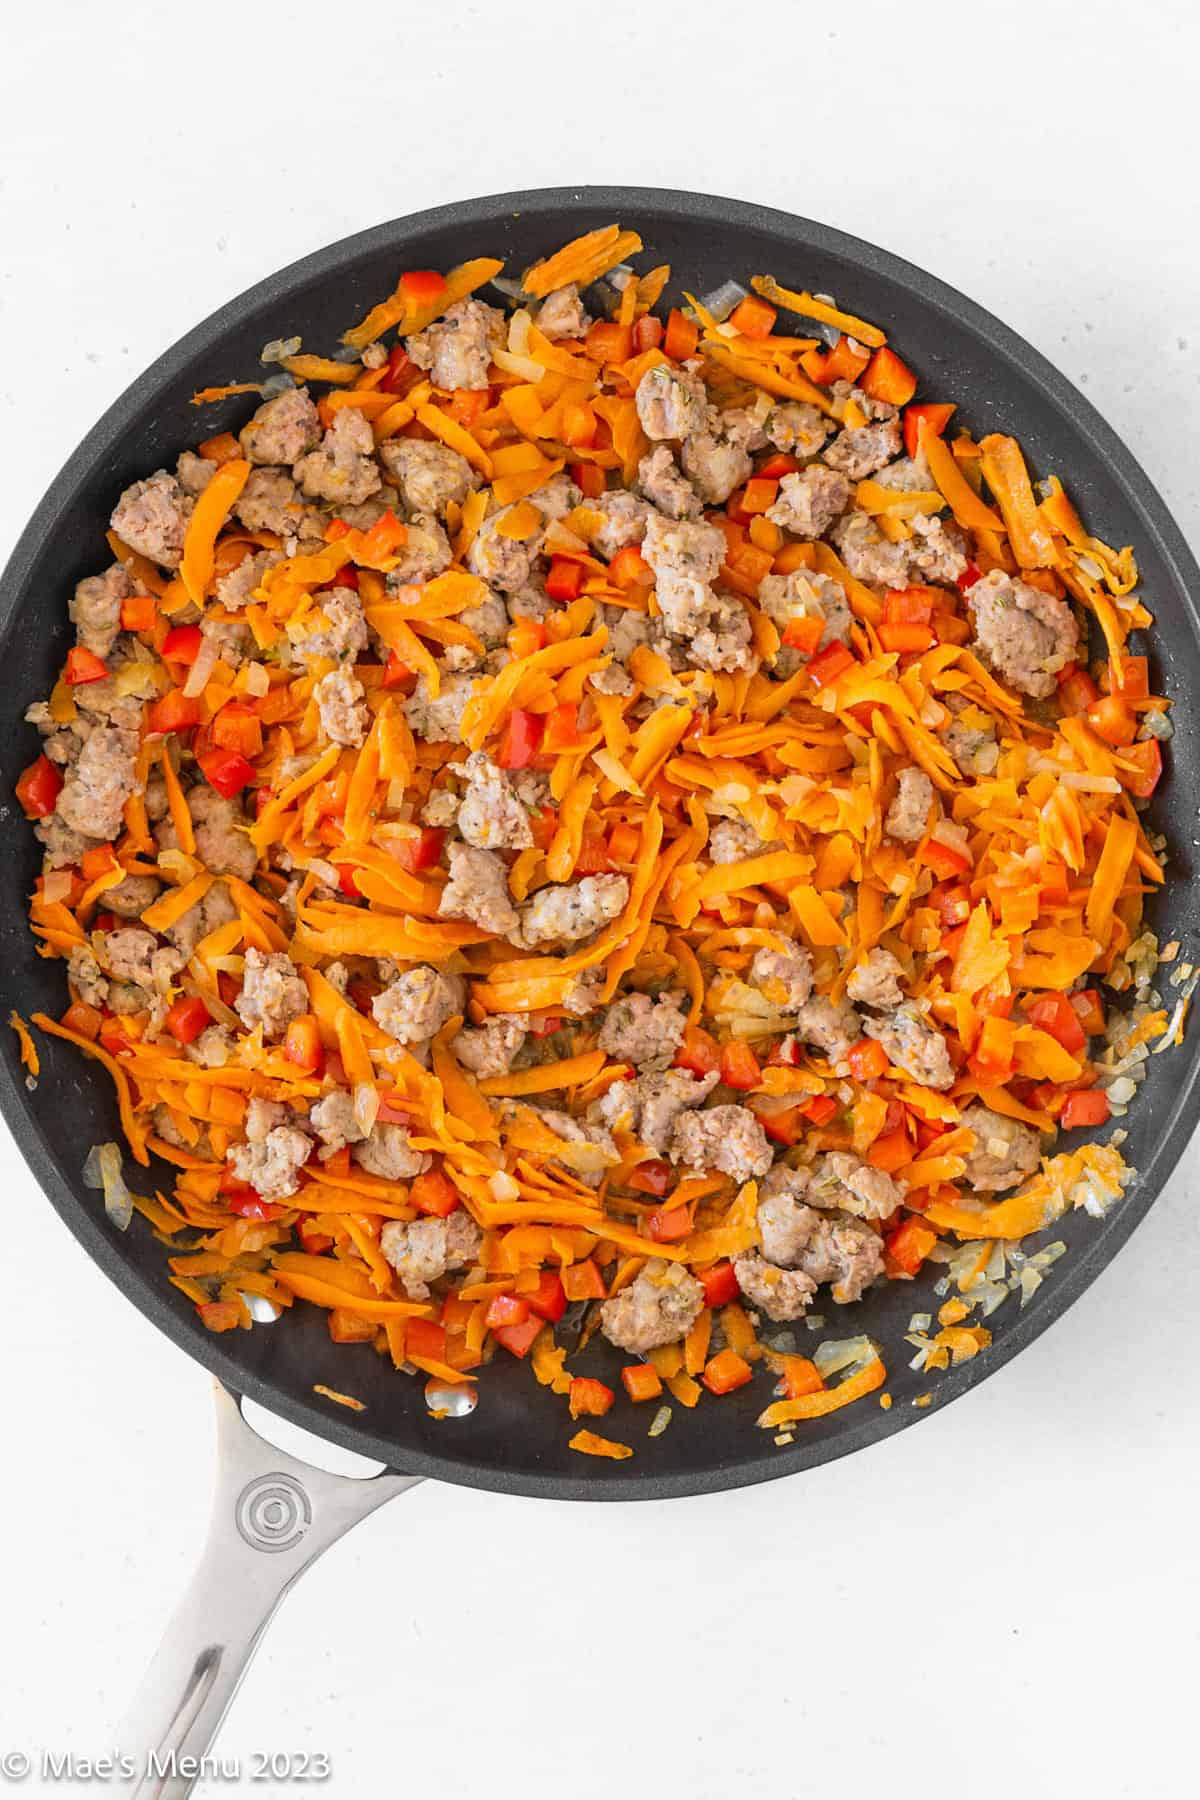 A large skillet of sauteed sausage and shredded sweet potatoes on a white background.